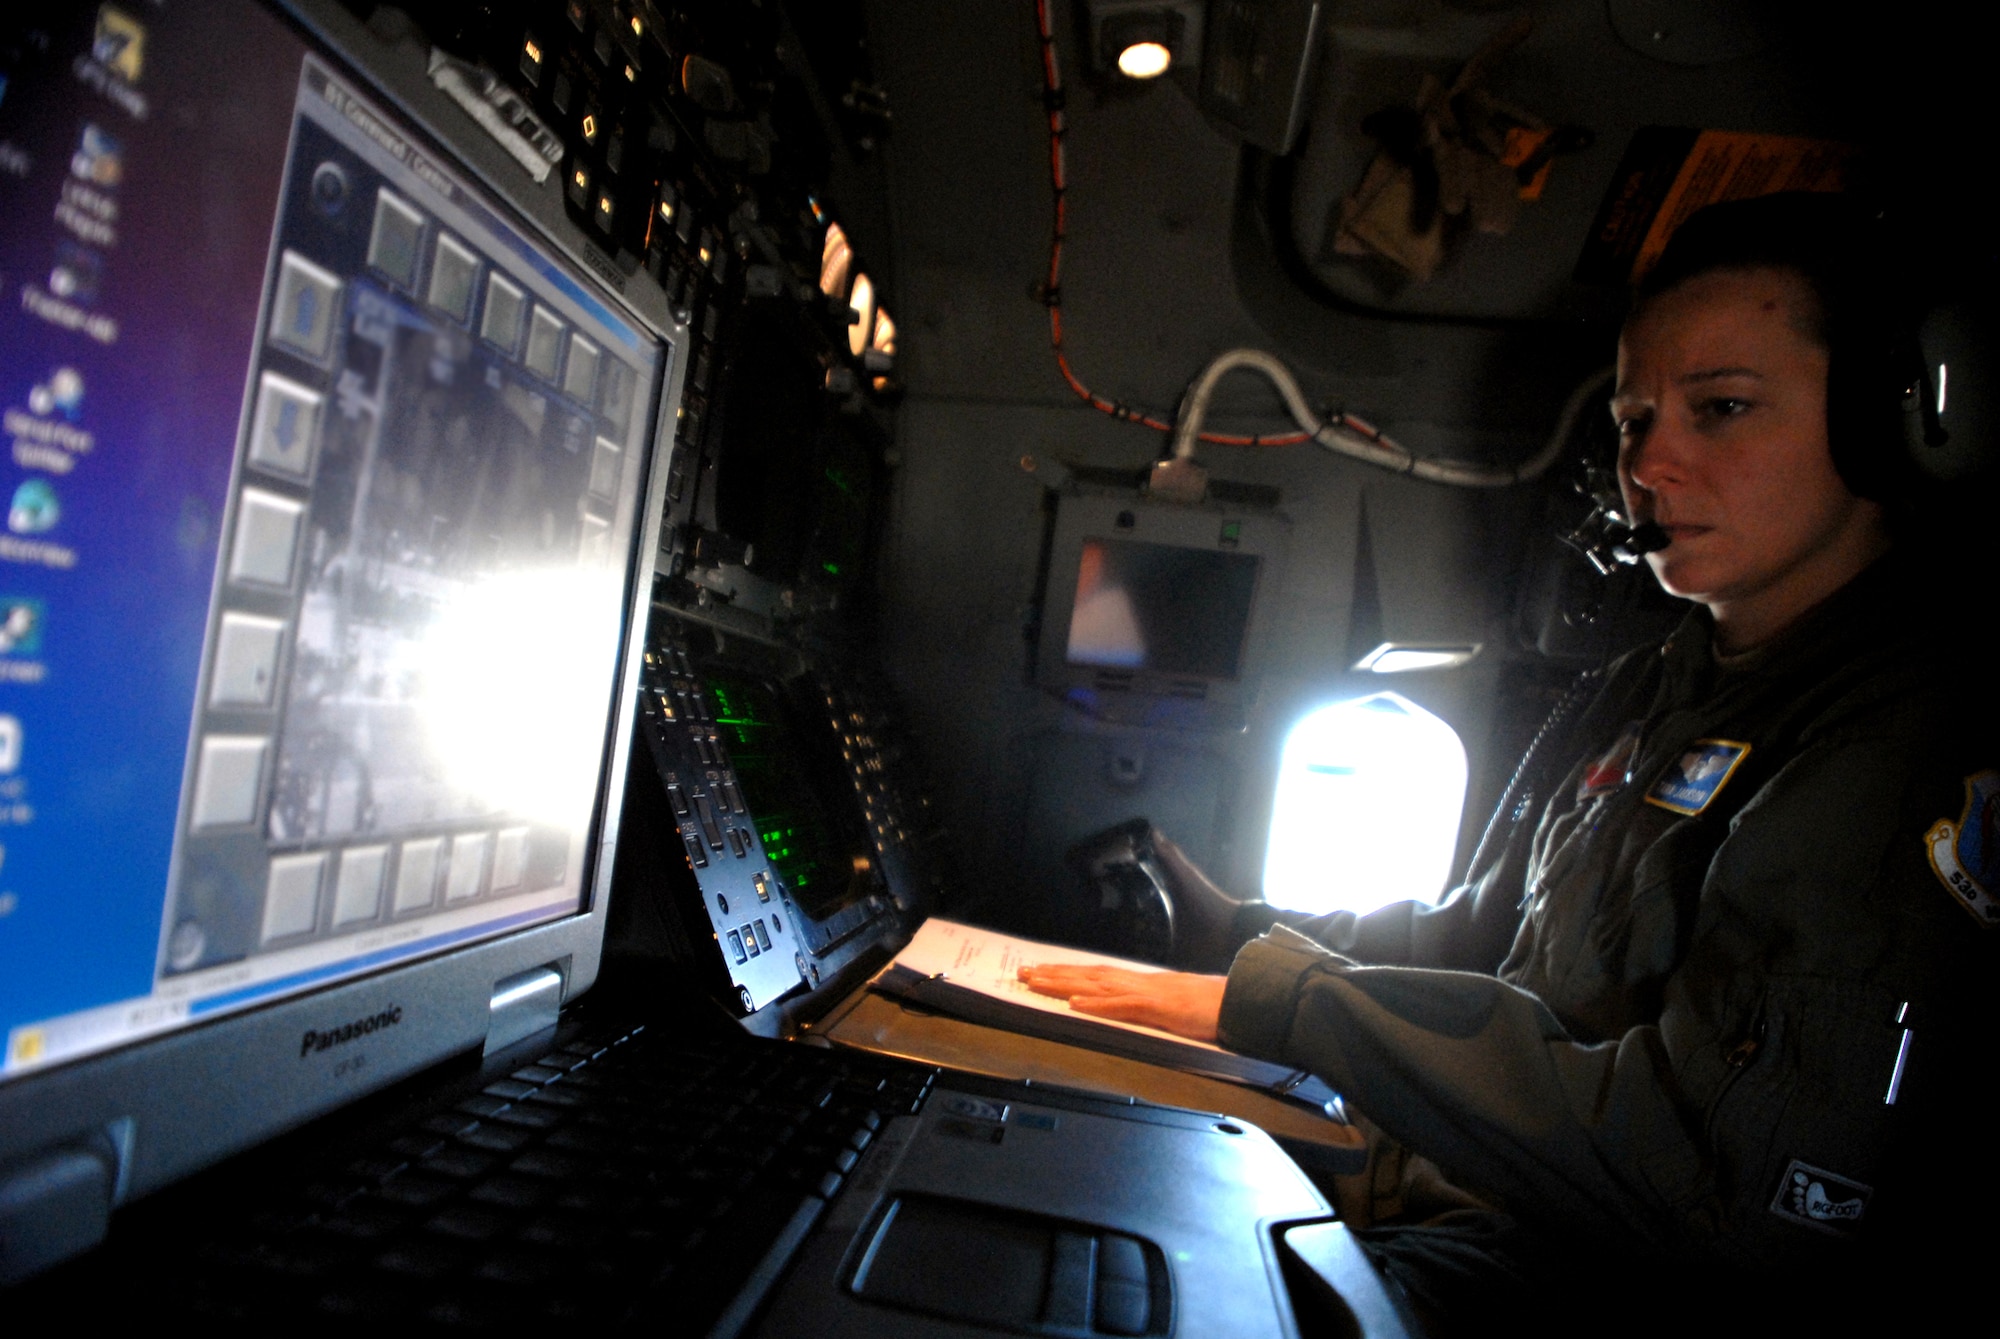 Positioned in the aft cockpit of a B-1B bomber, Capt. Tara Jackson, 31st Test and Evaluation Squadron B-1B operational test weapons systems officer, focuses on a target using the Laptop Controlled Targeting Pod Phase II upgrade during a test, Dec. 7. Testing for the upgrade merged both operational and developmental resources to deliver needed capability to the warfighter. (U.S. Air Force photo by Jet Fabara)